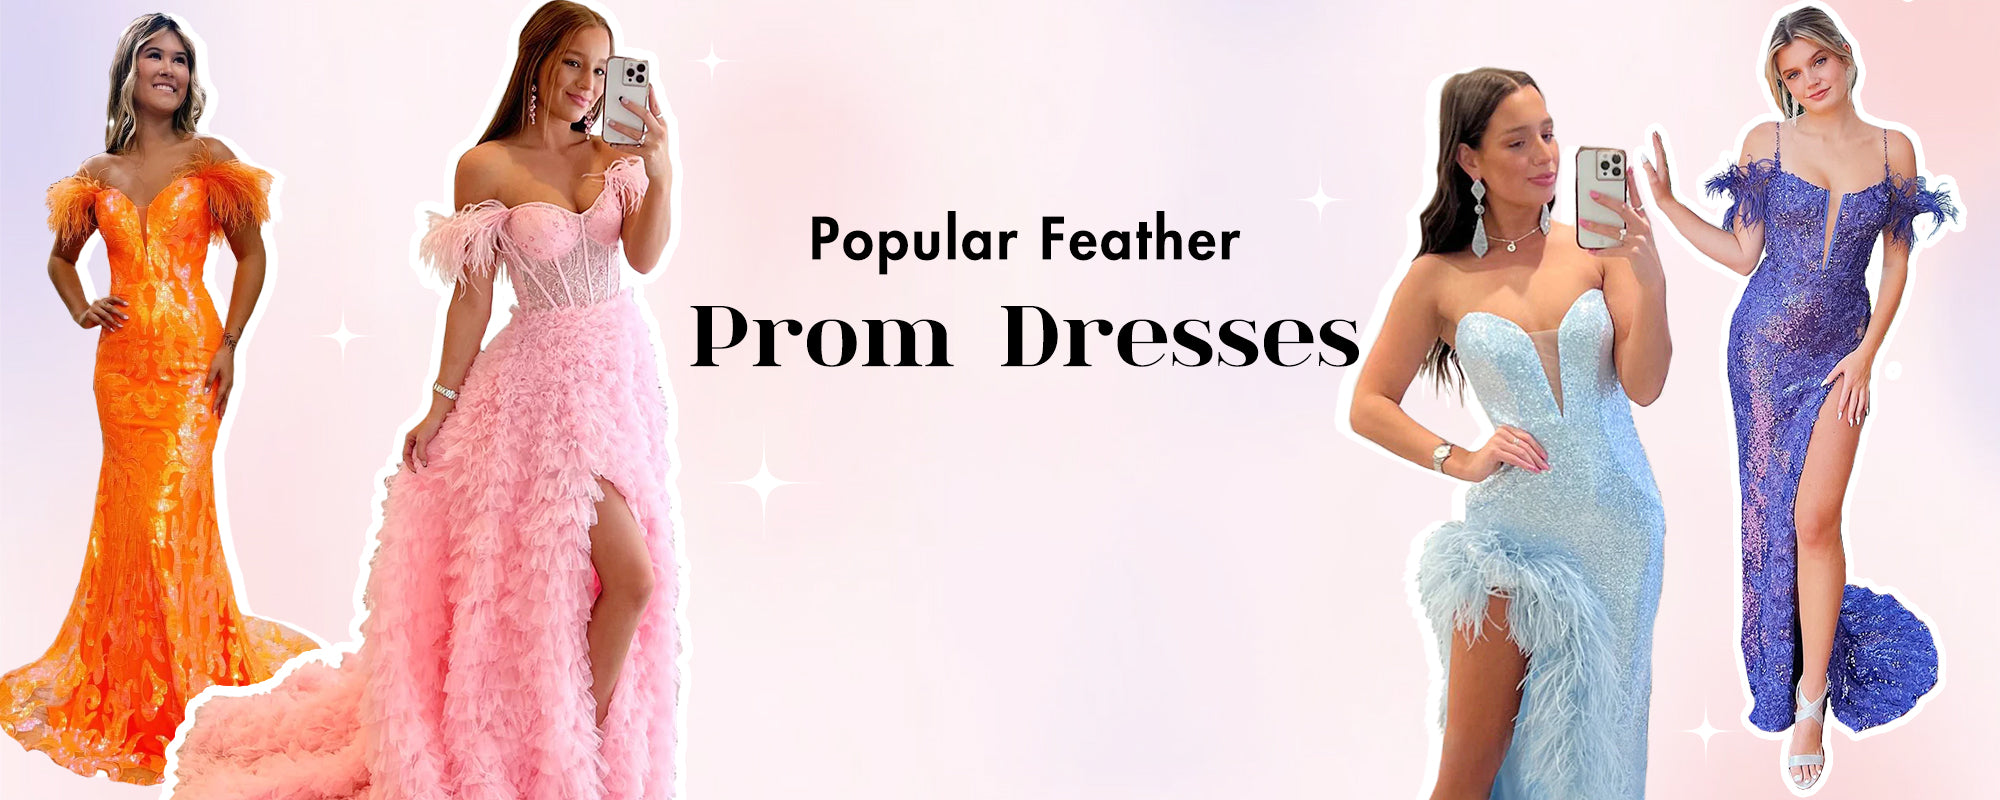 Popular Feather Prom Dresses